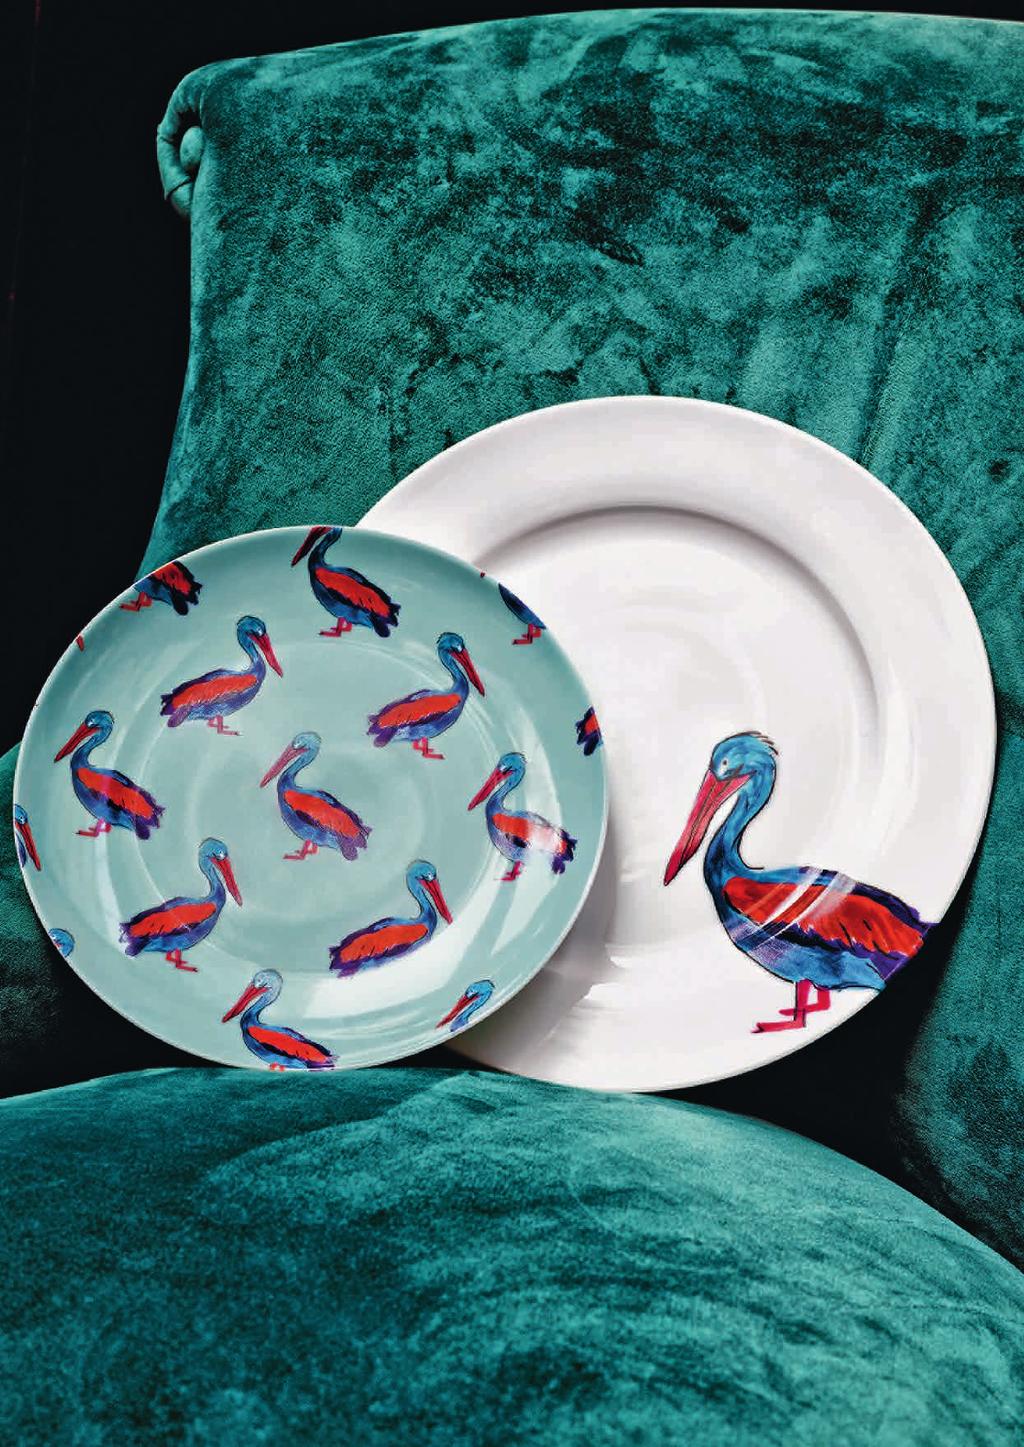 ANIMAUX DE CUISINE The Animaux de Cuisine collection, designed by Fabienne Chapot, comes from a world where the colours are deeper and richer, where the prints are intricate and almost alive Bit by